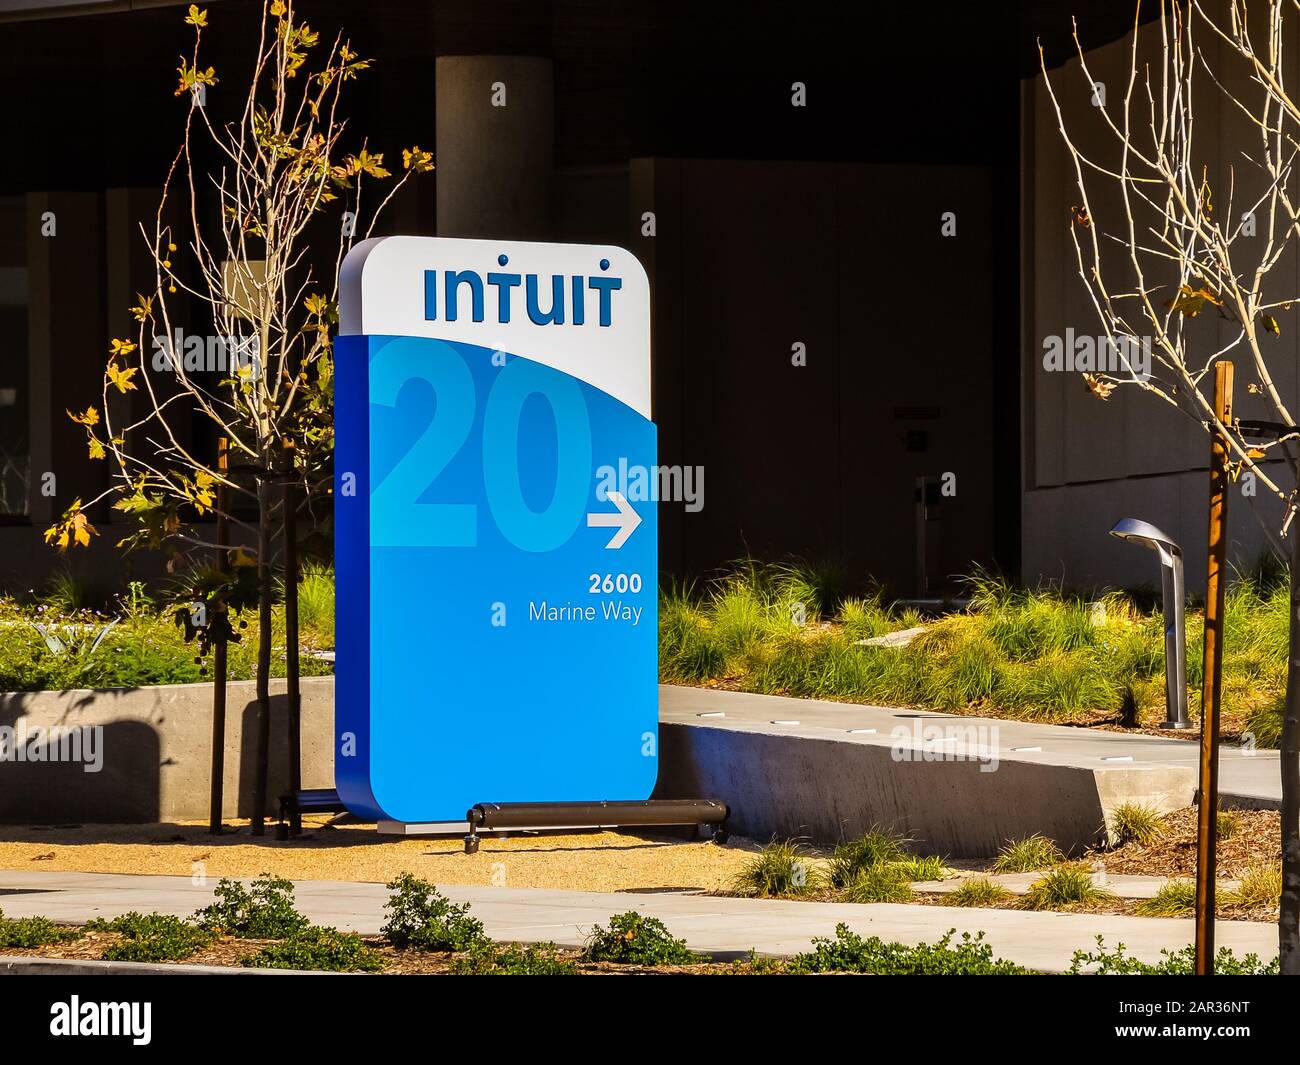 Intuit Inc. - A business and financial software company that develops and sells financial, accounting and tax preparation software. Stock Photo